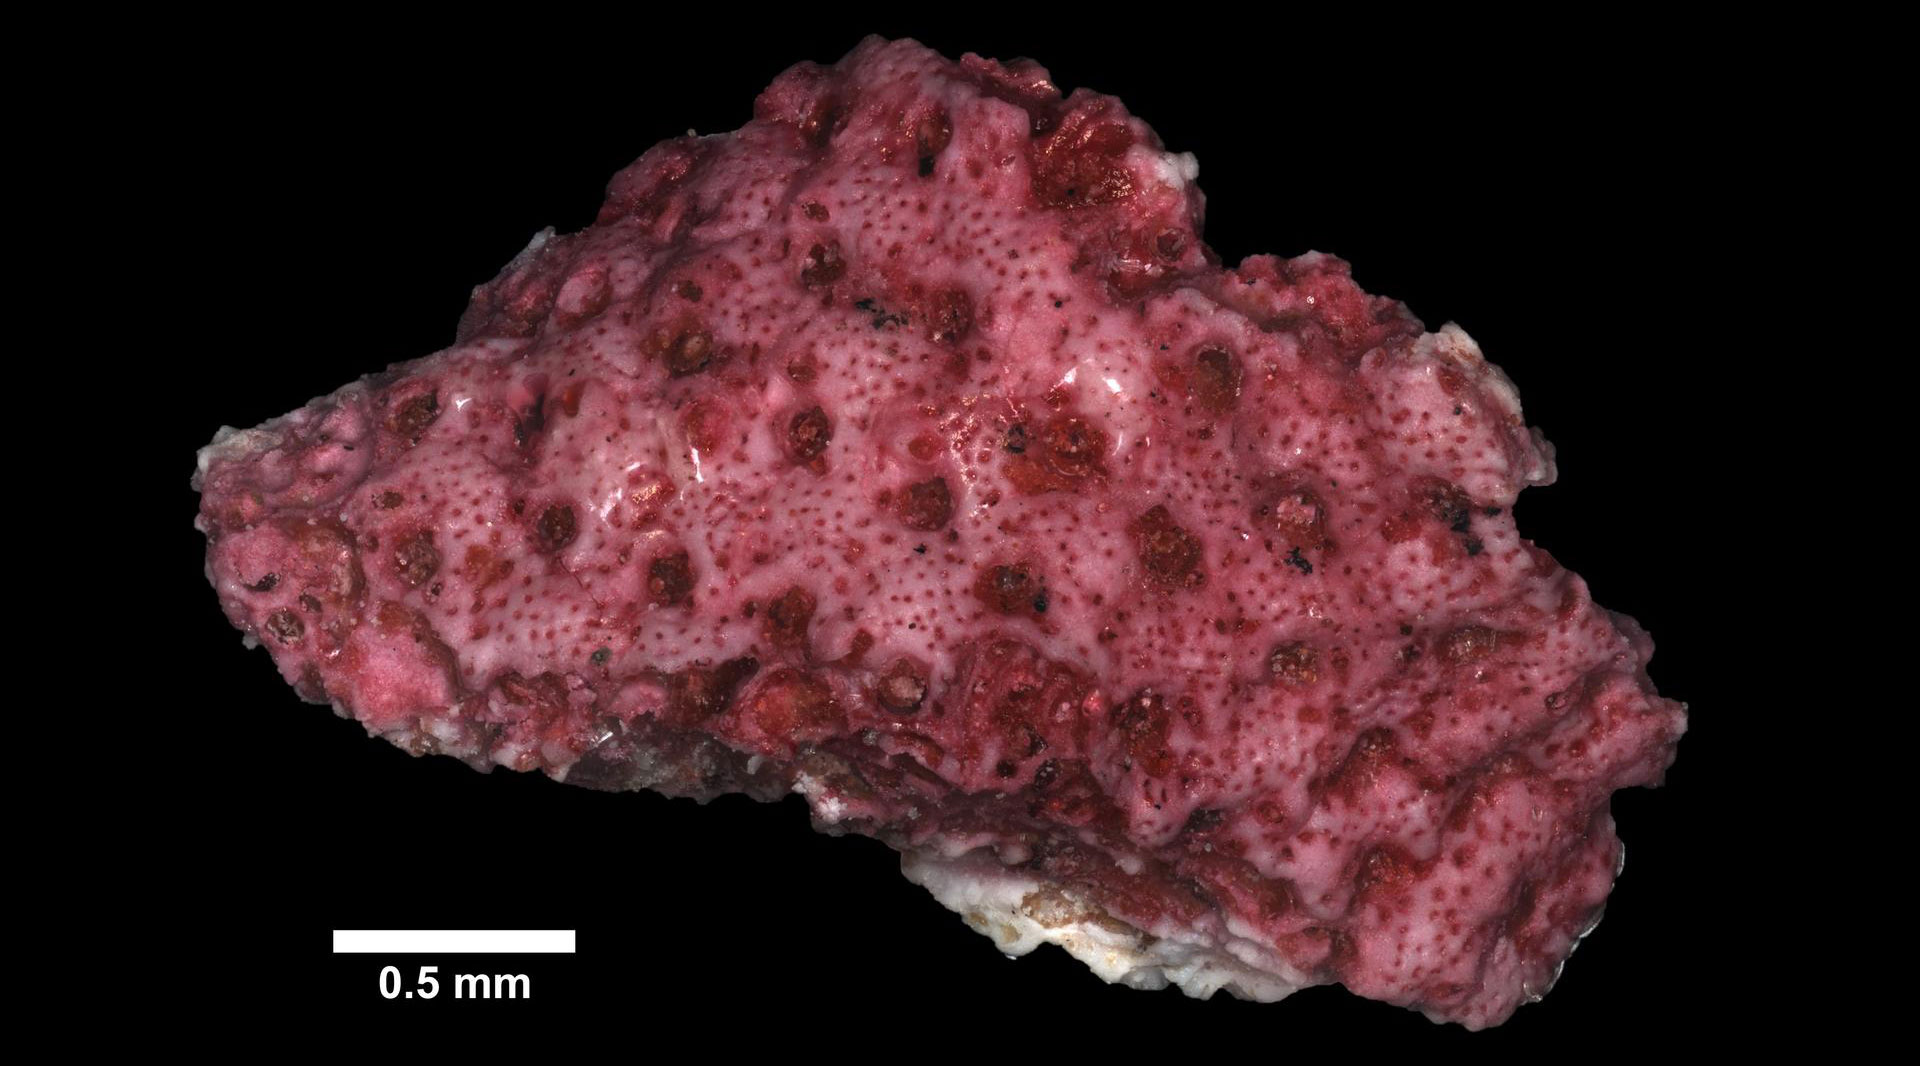 Photograph of a fossil bryozoan from the Miocene of Santa Barbara Island, California. The specimen is pinkish in color and has a series of regular depressions and smaller pits on the surface. The scale bar is half a millimeter, indicating the specimen is very small.